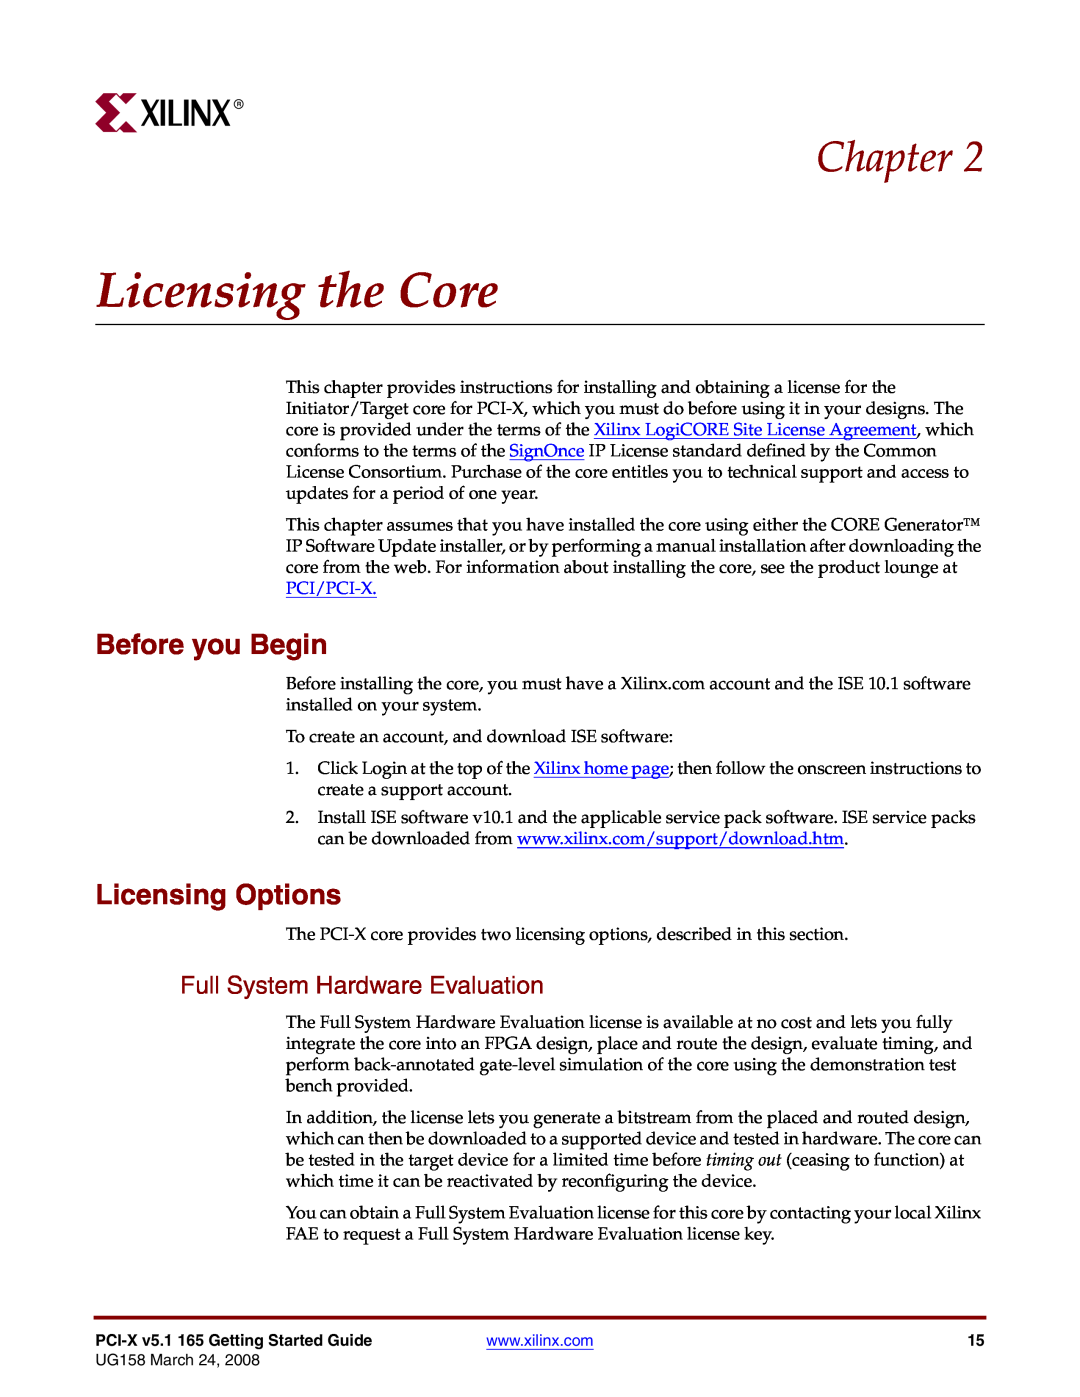 Xilinx PCI-X v5.1 manual Licensing the Core, Before you Begin, Licensing Options, Full System Hardware Evaluation, Chapter 